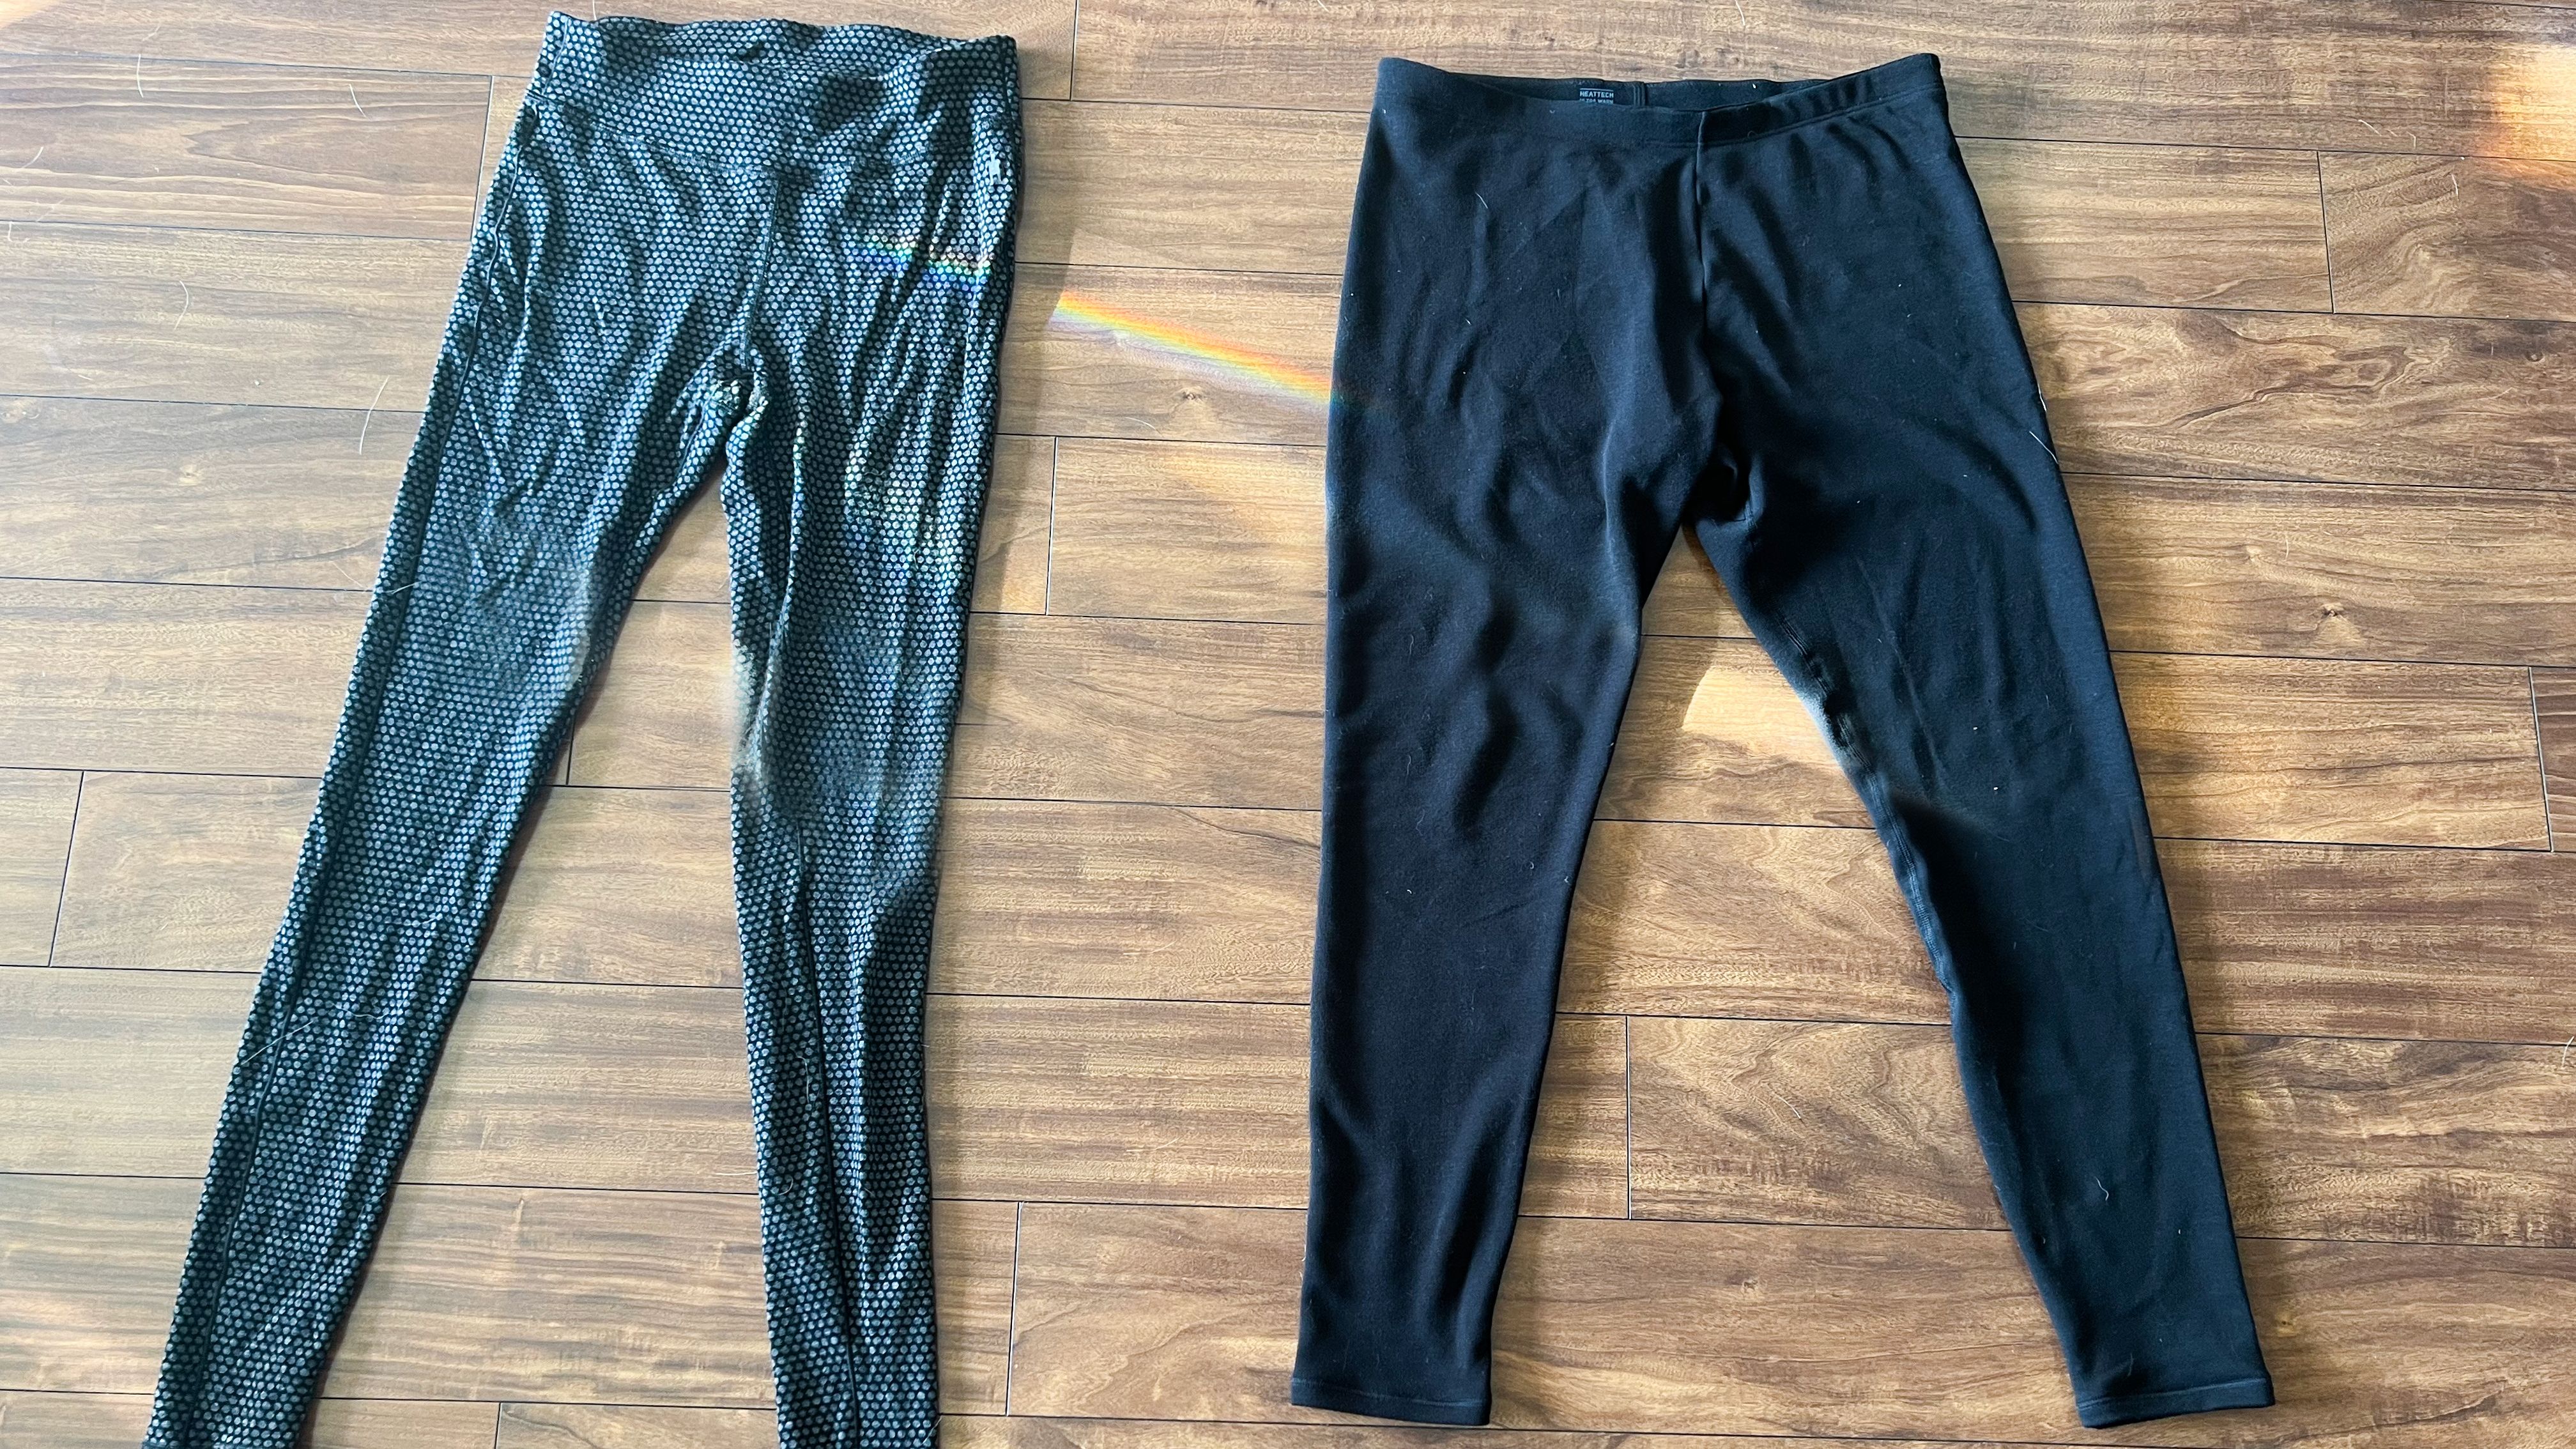 Smartwool vs. Uniqlo HeatTech: Which base layer is better?